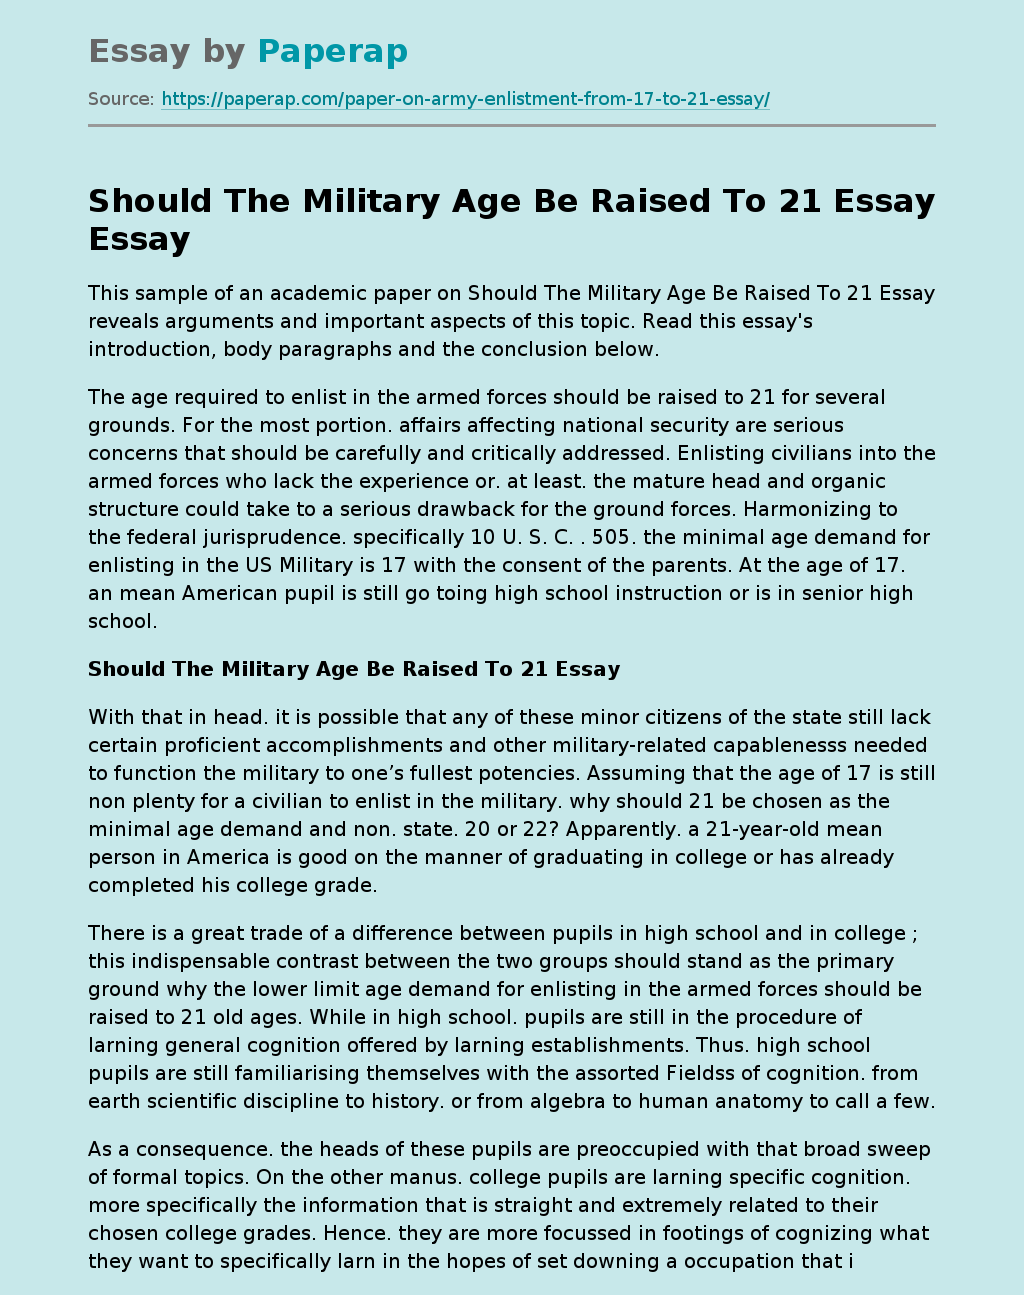 Should The Military Age Be Raised To 21 Essay